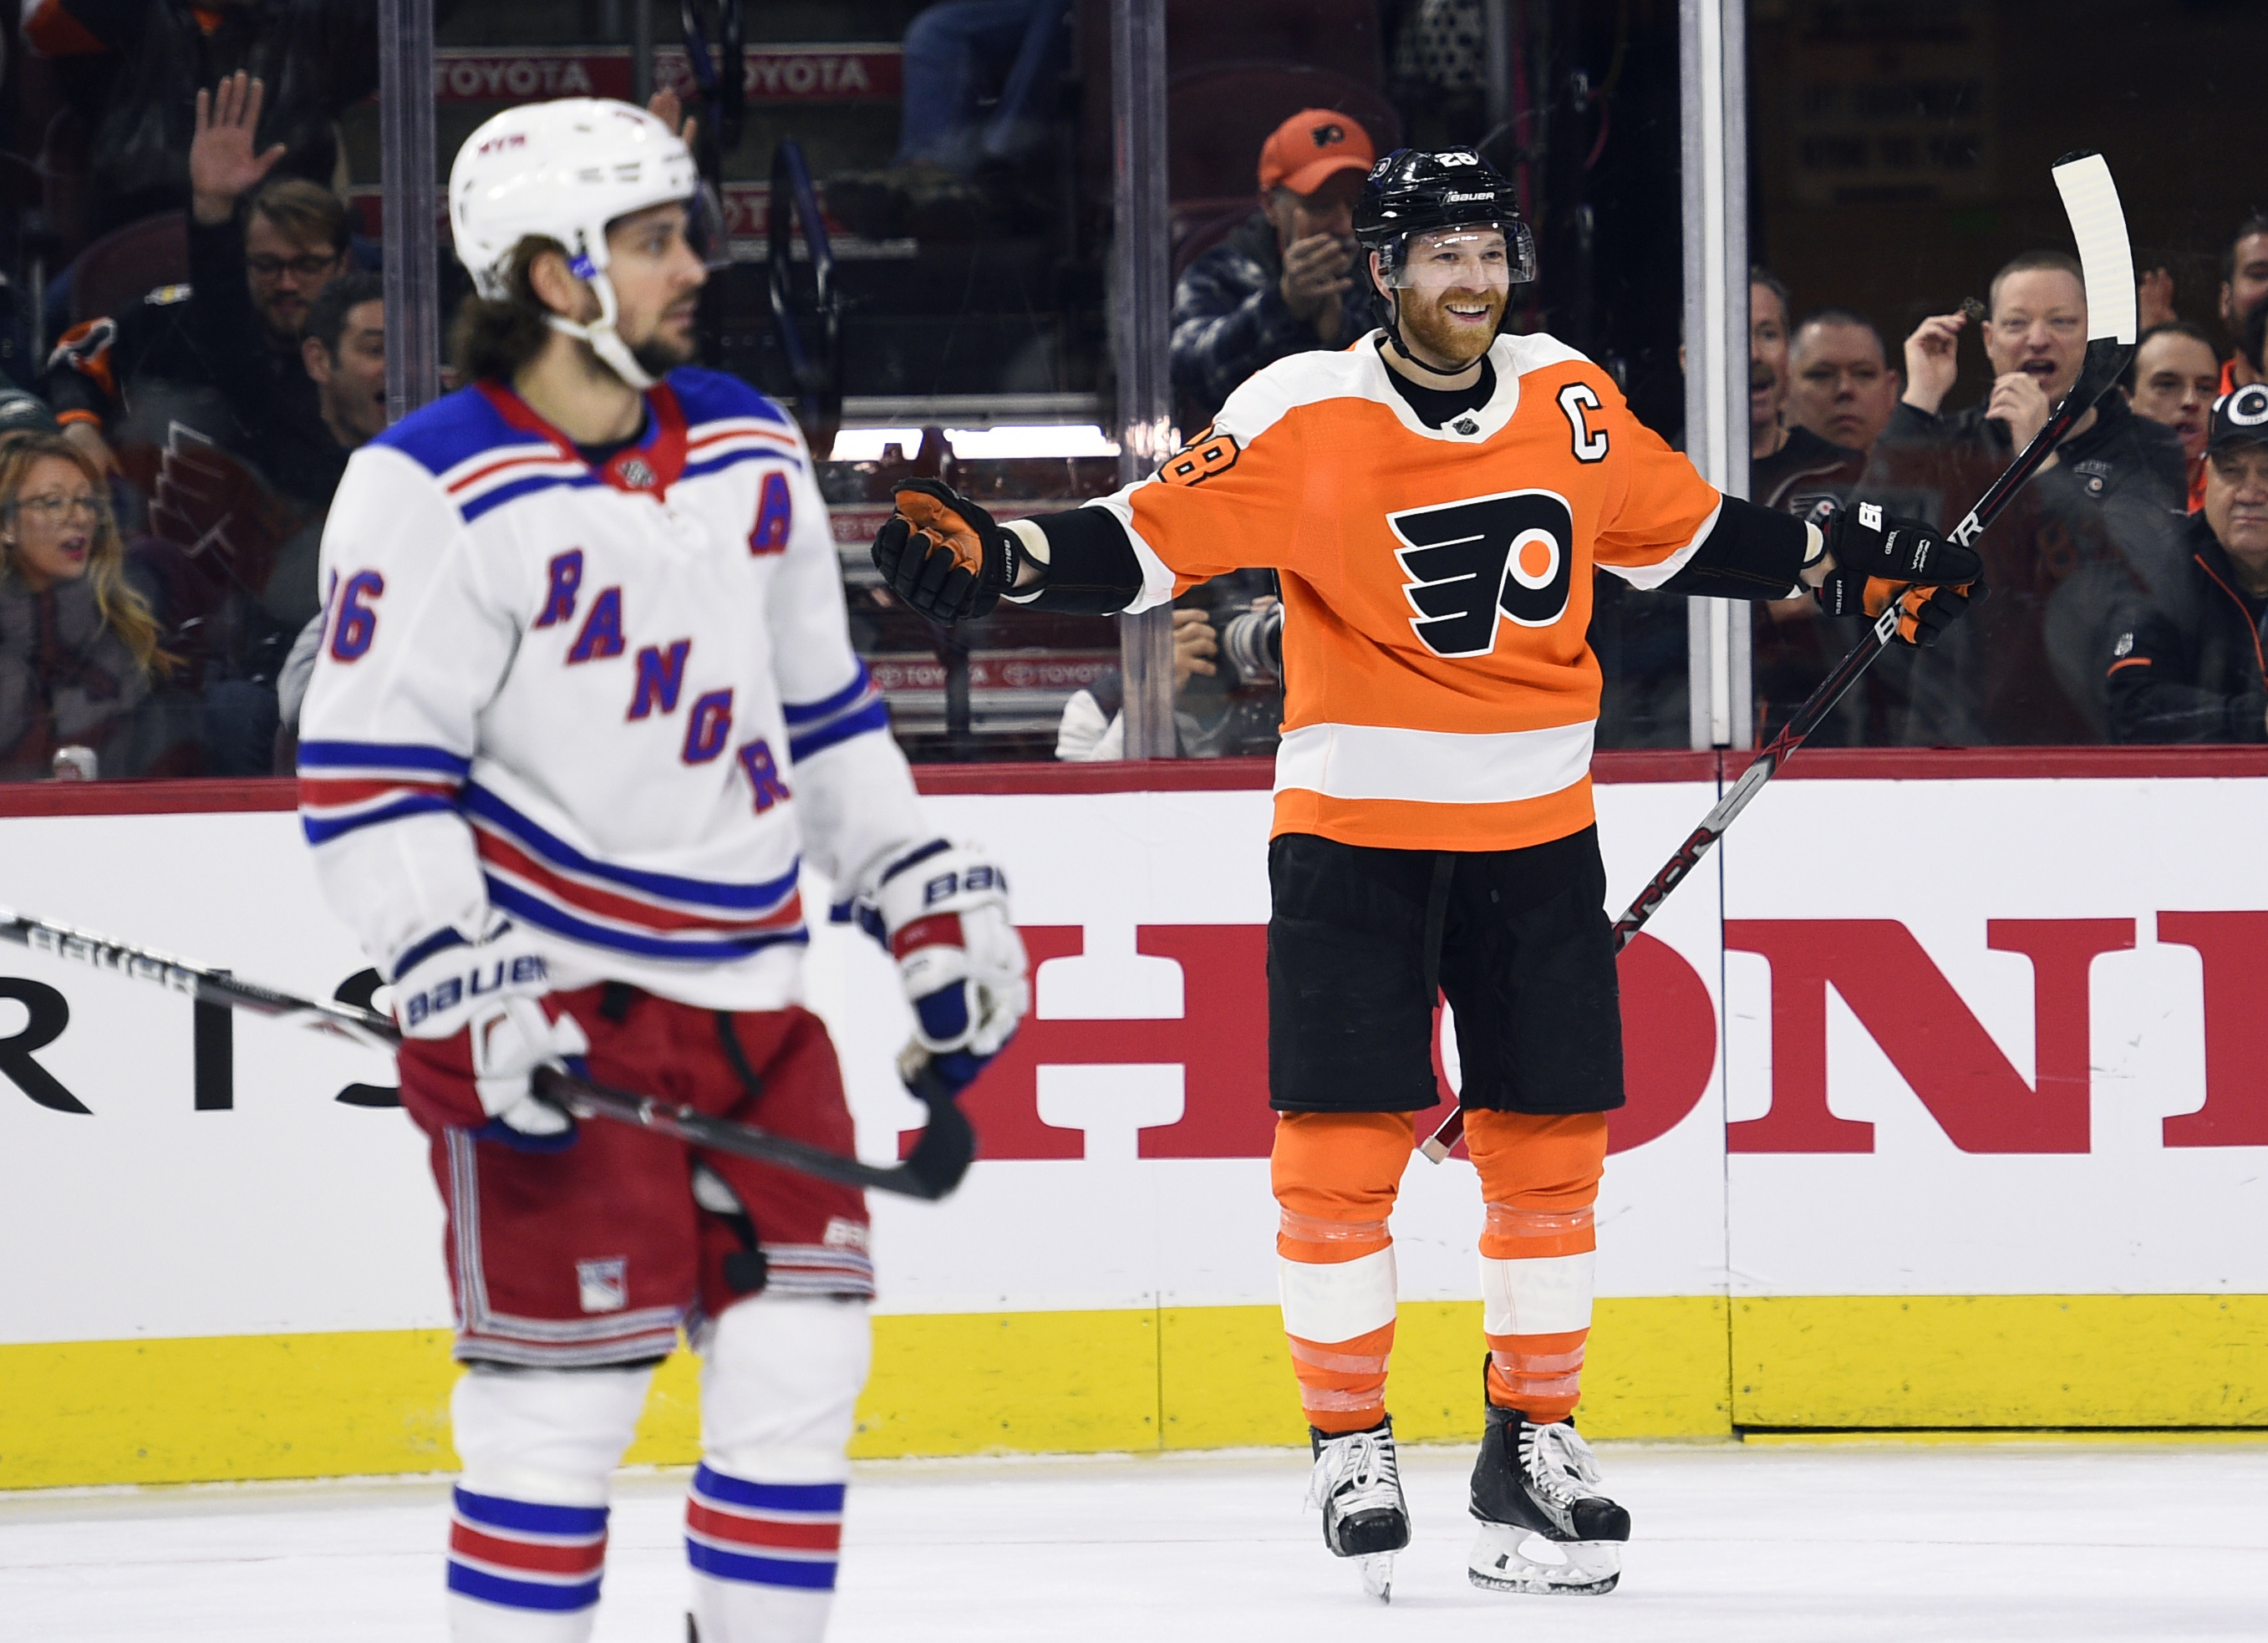 Hart Trick: How the Should-Be MVP Claude Giroux Carried the Flyers to a Playoff Matchup with the Penguins